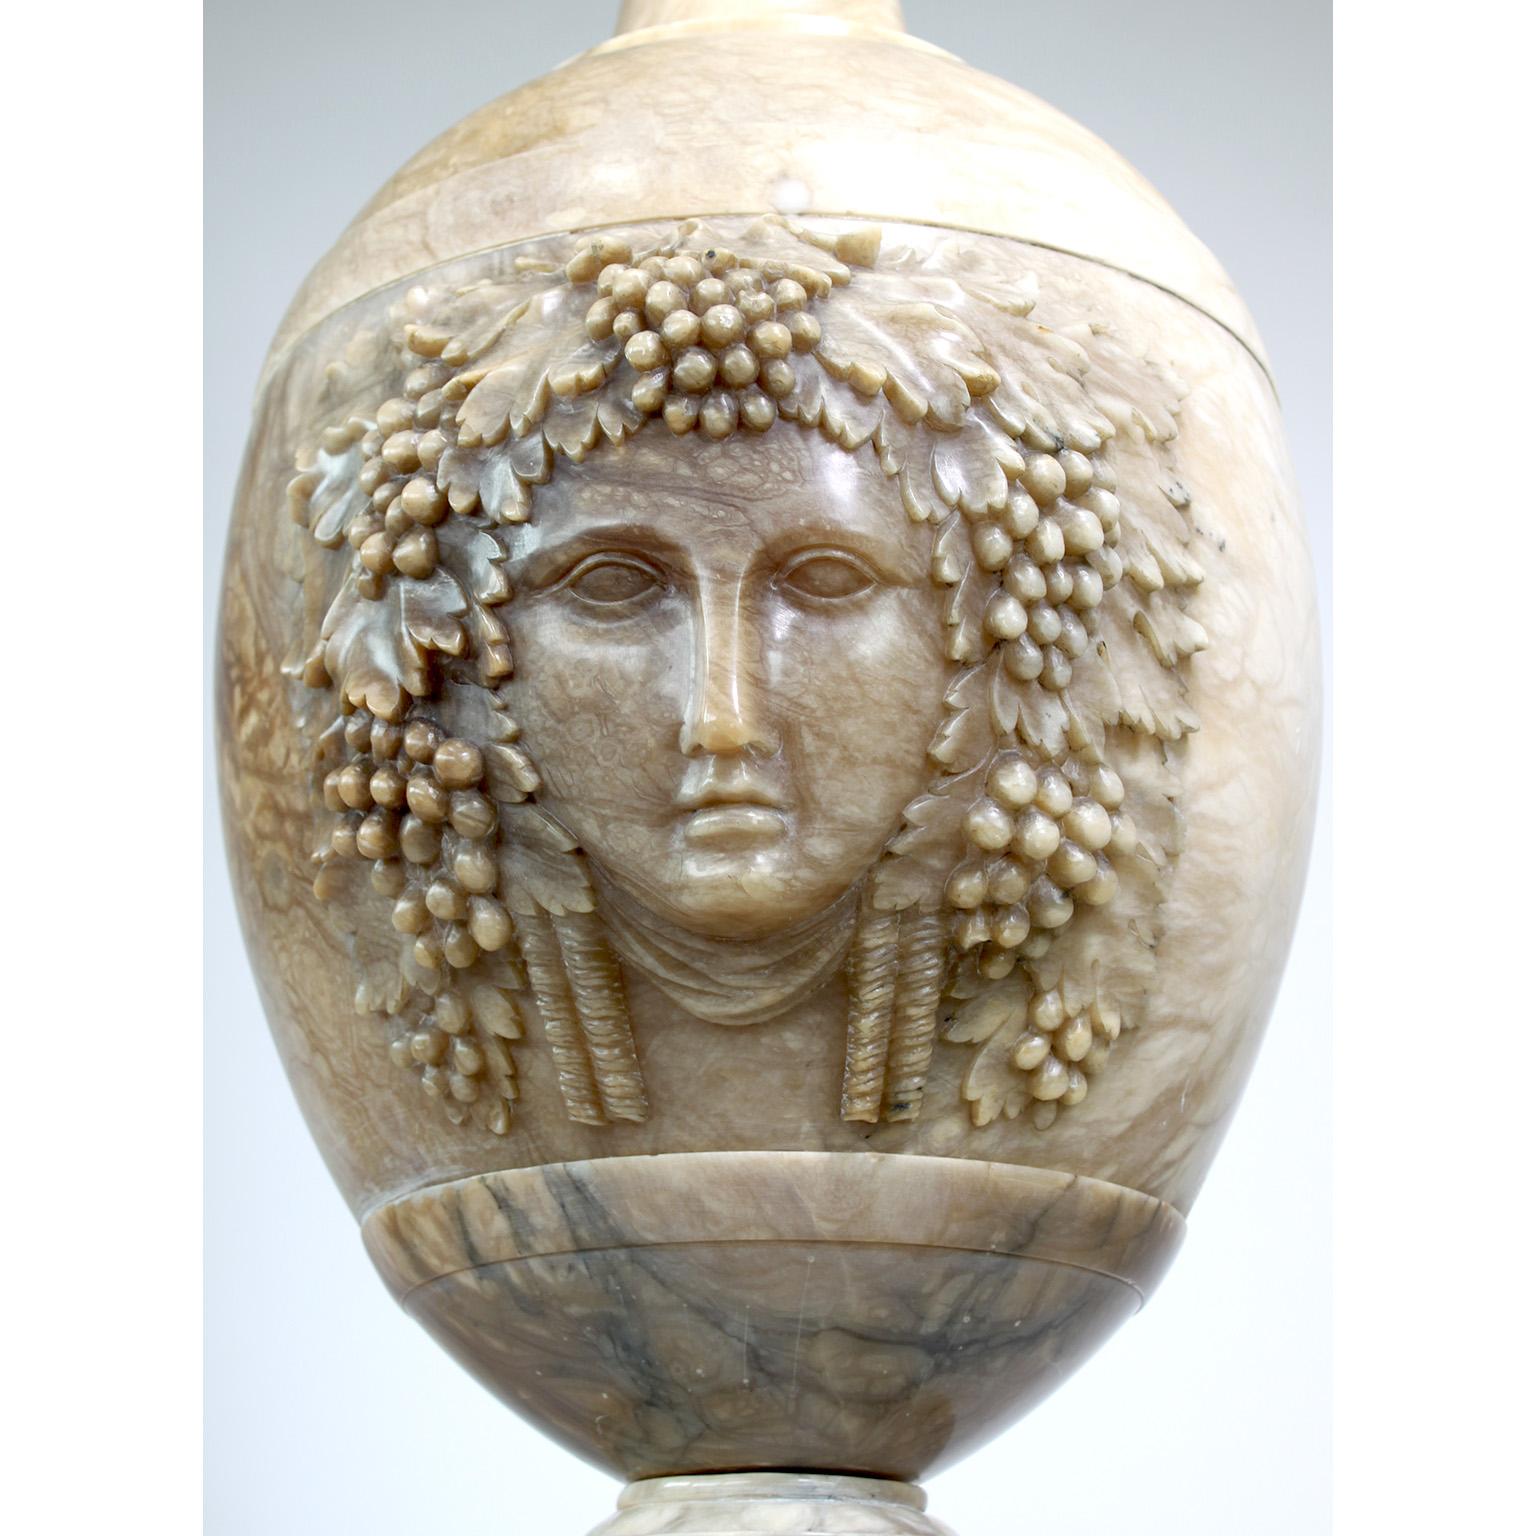 A very fine and monumental Italian 19th century Renaissance Revival Style Carved Alabaster figural ewer or urn. The impressive ornately carved alabaster ovoid body centered with an allegorical female mask crowned with grape vines and leaves, the top